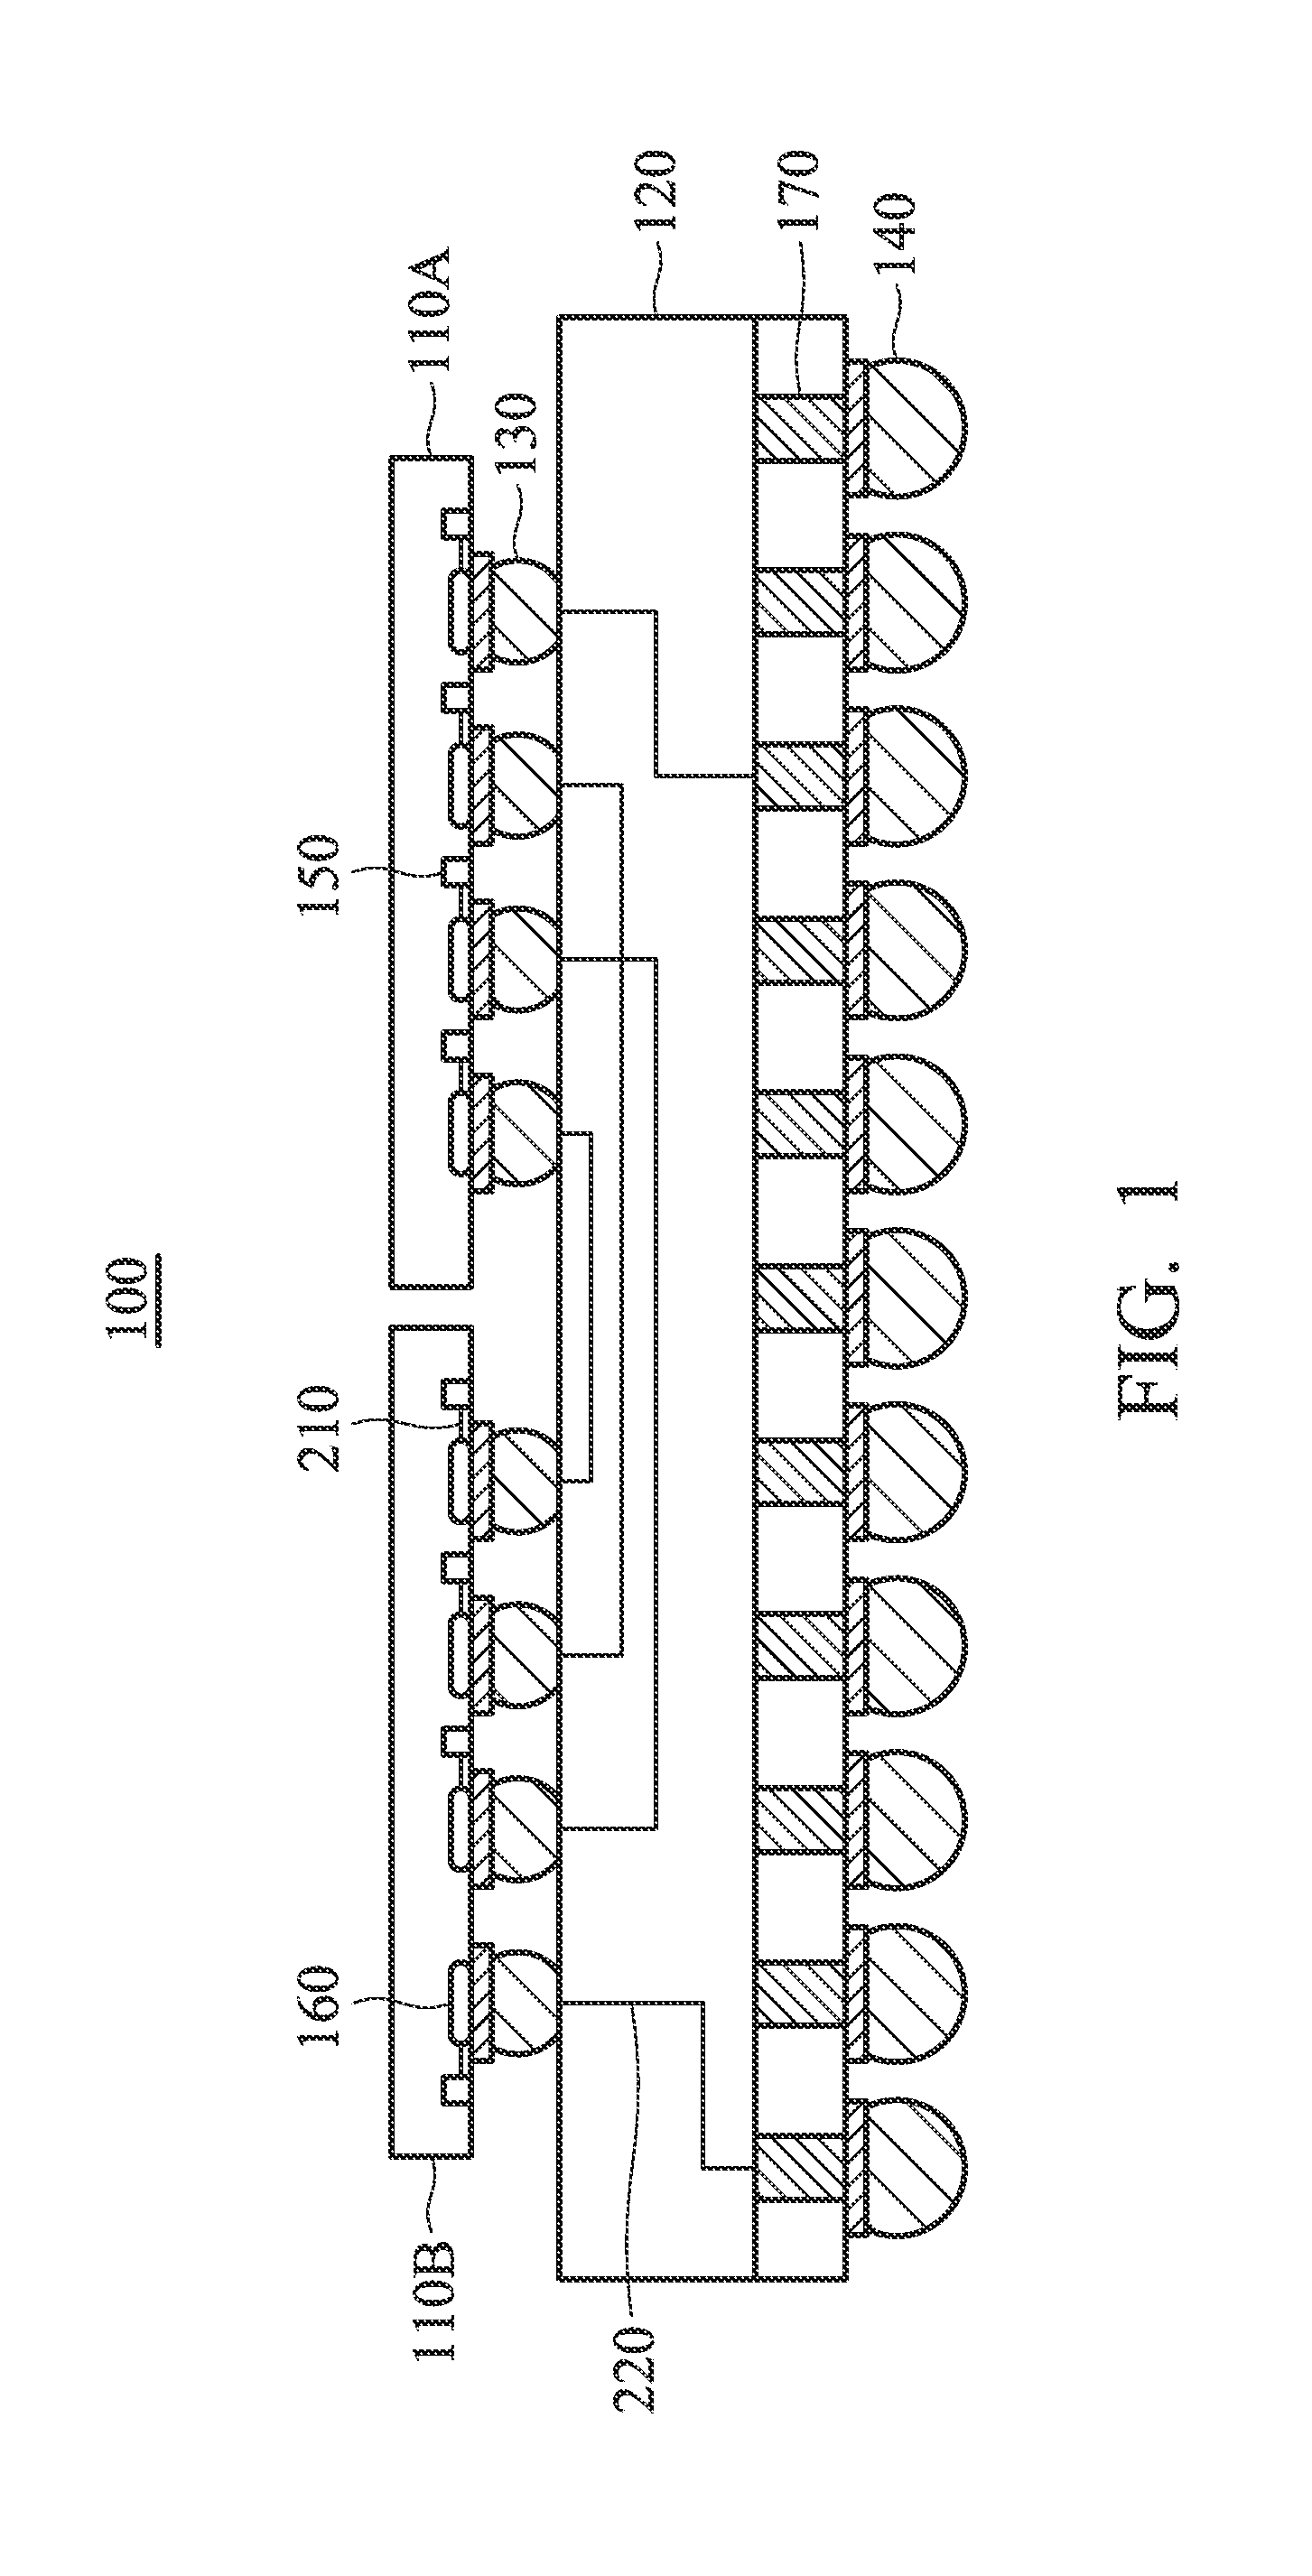 Method for co-designing flip-chip and interposer